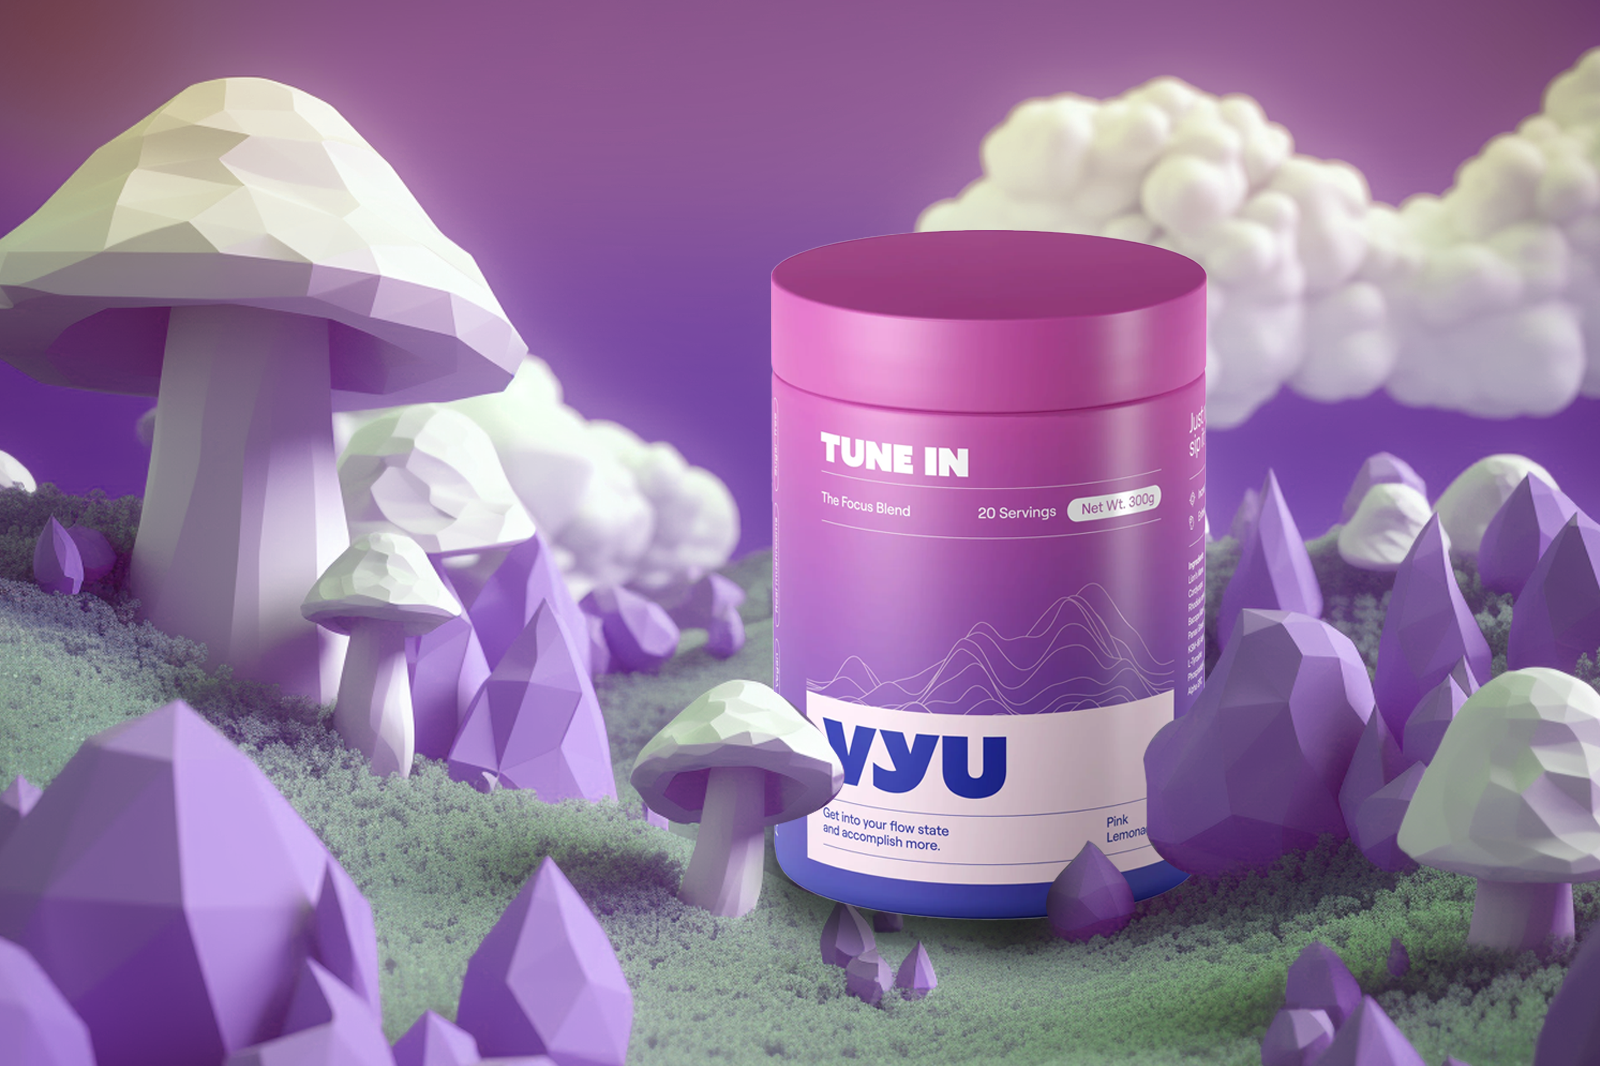 A container of VYU Tune In with Pink Lemonade flavor placed on a ground surrounded by white grass and mushrooms